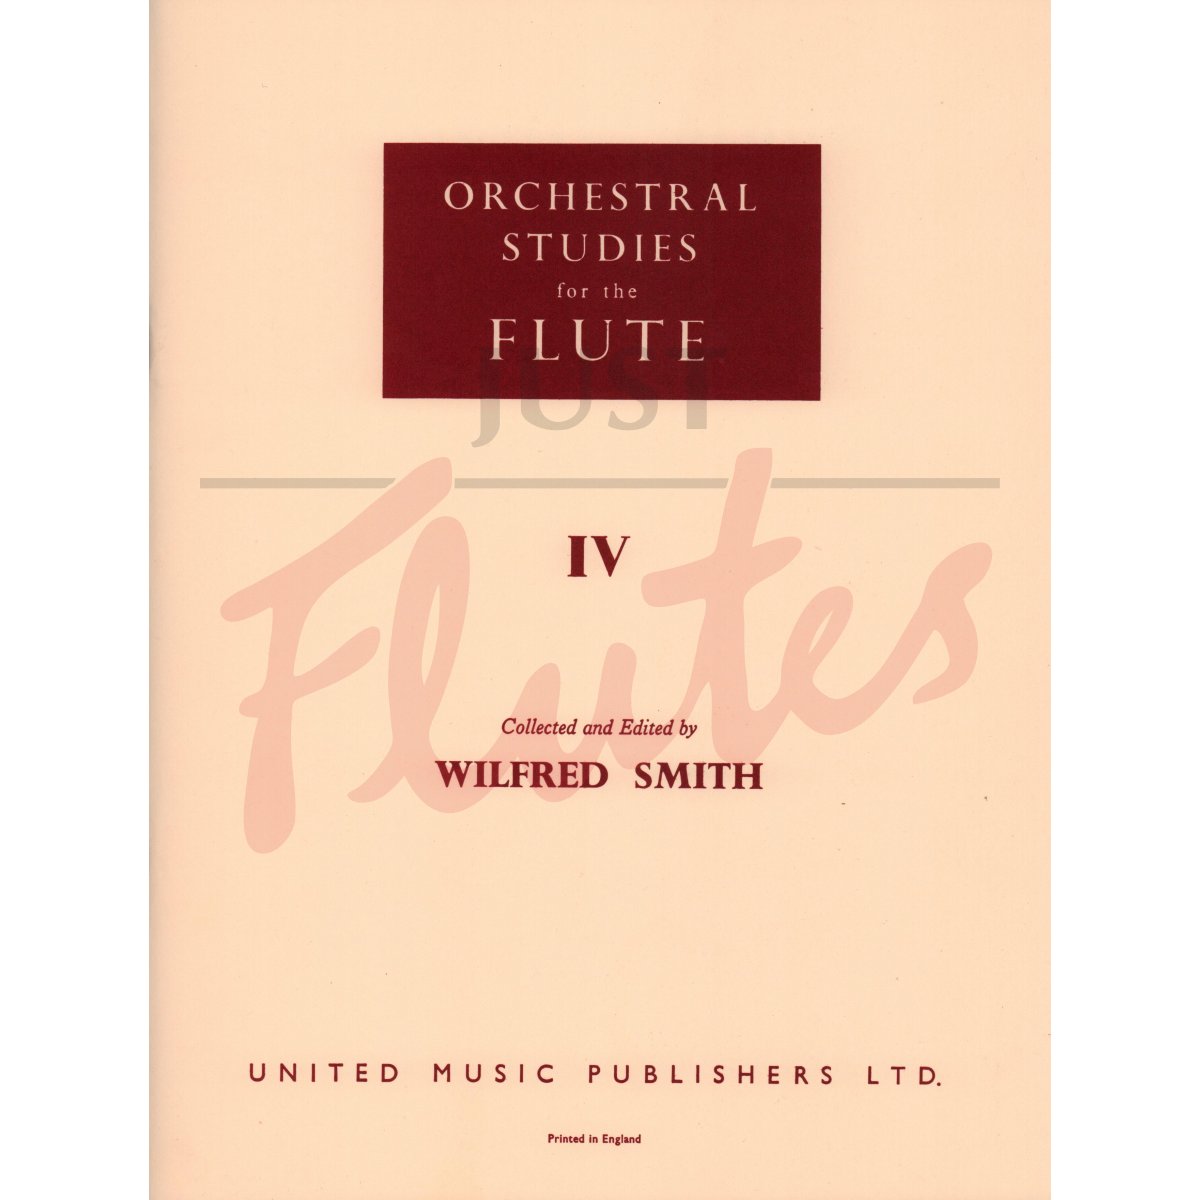 Orchestral Studies for the Flute, Volume 4: Opera and Ballet